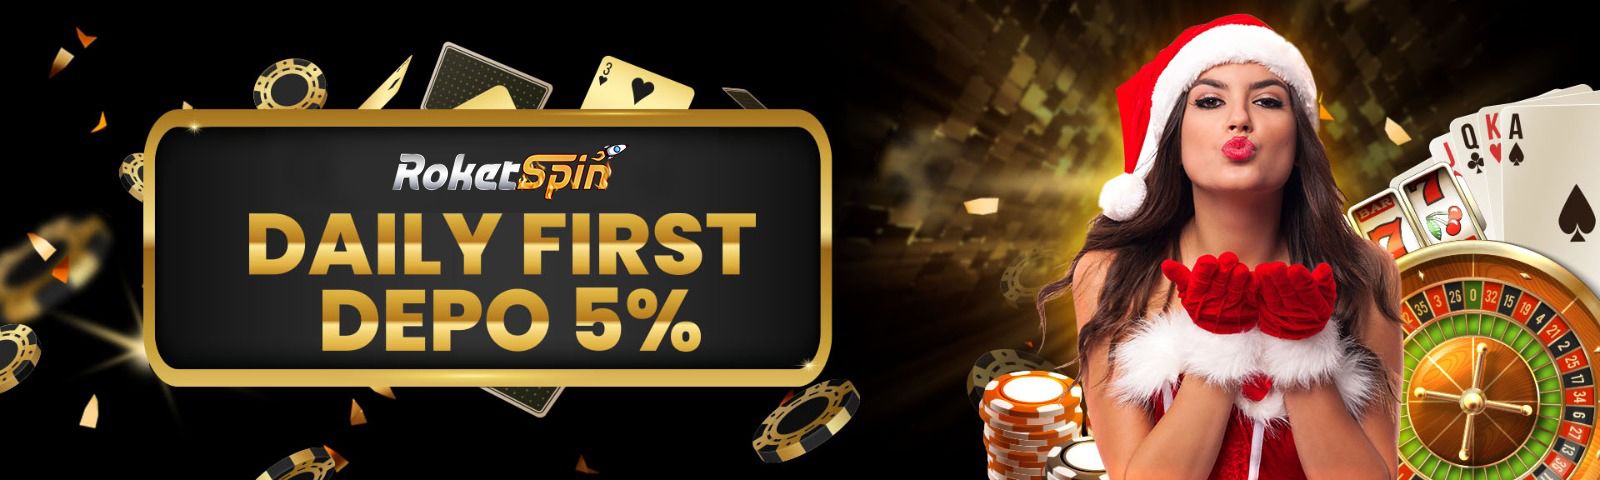 DAILY FIRST DEPOSIT